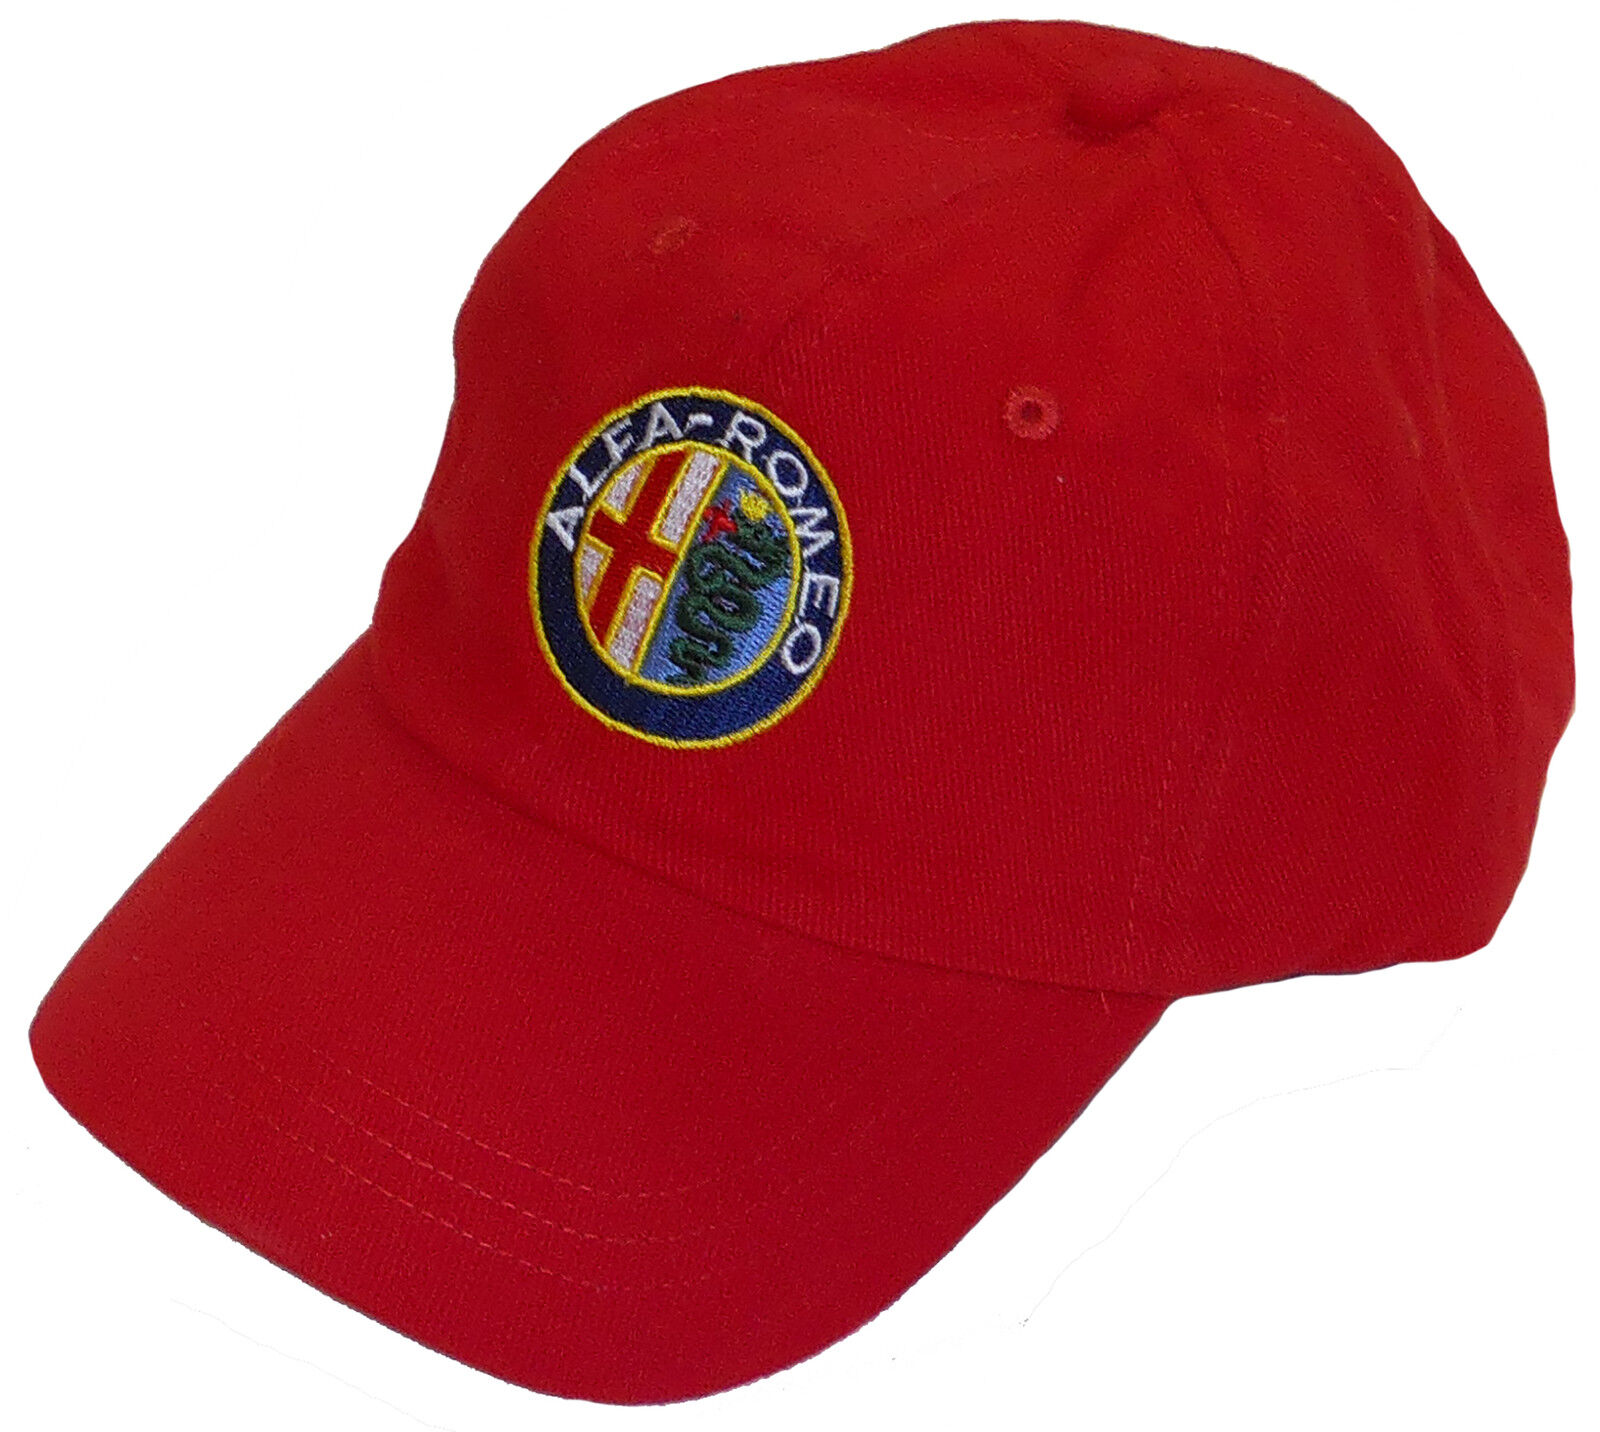 ALFA ROMEO embroidered hat - red body